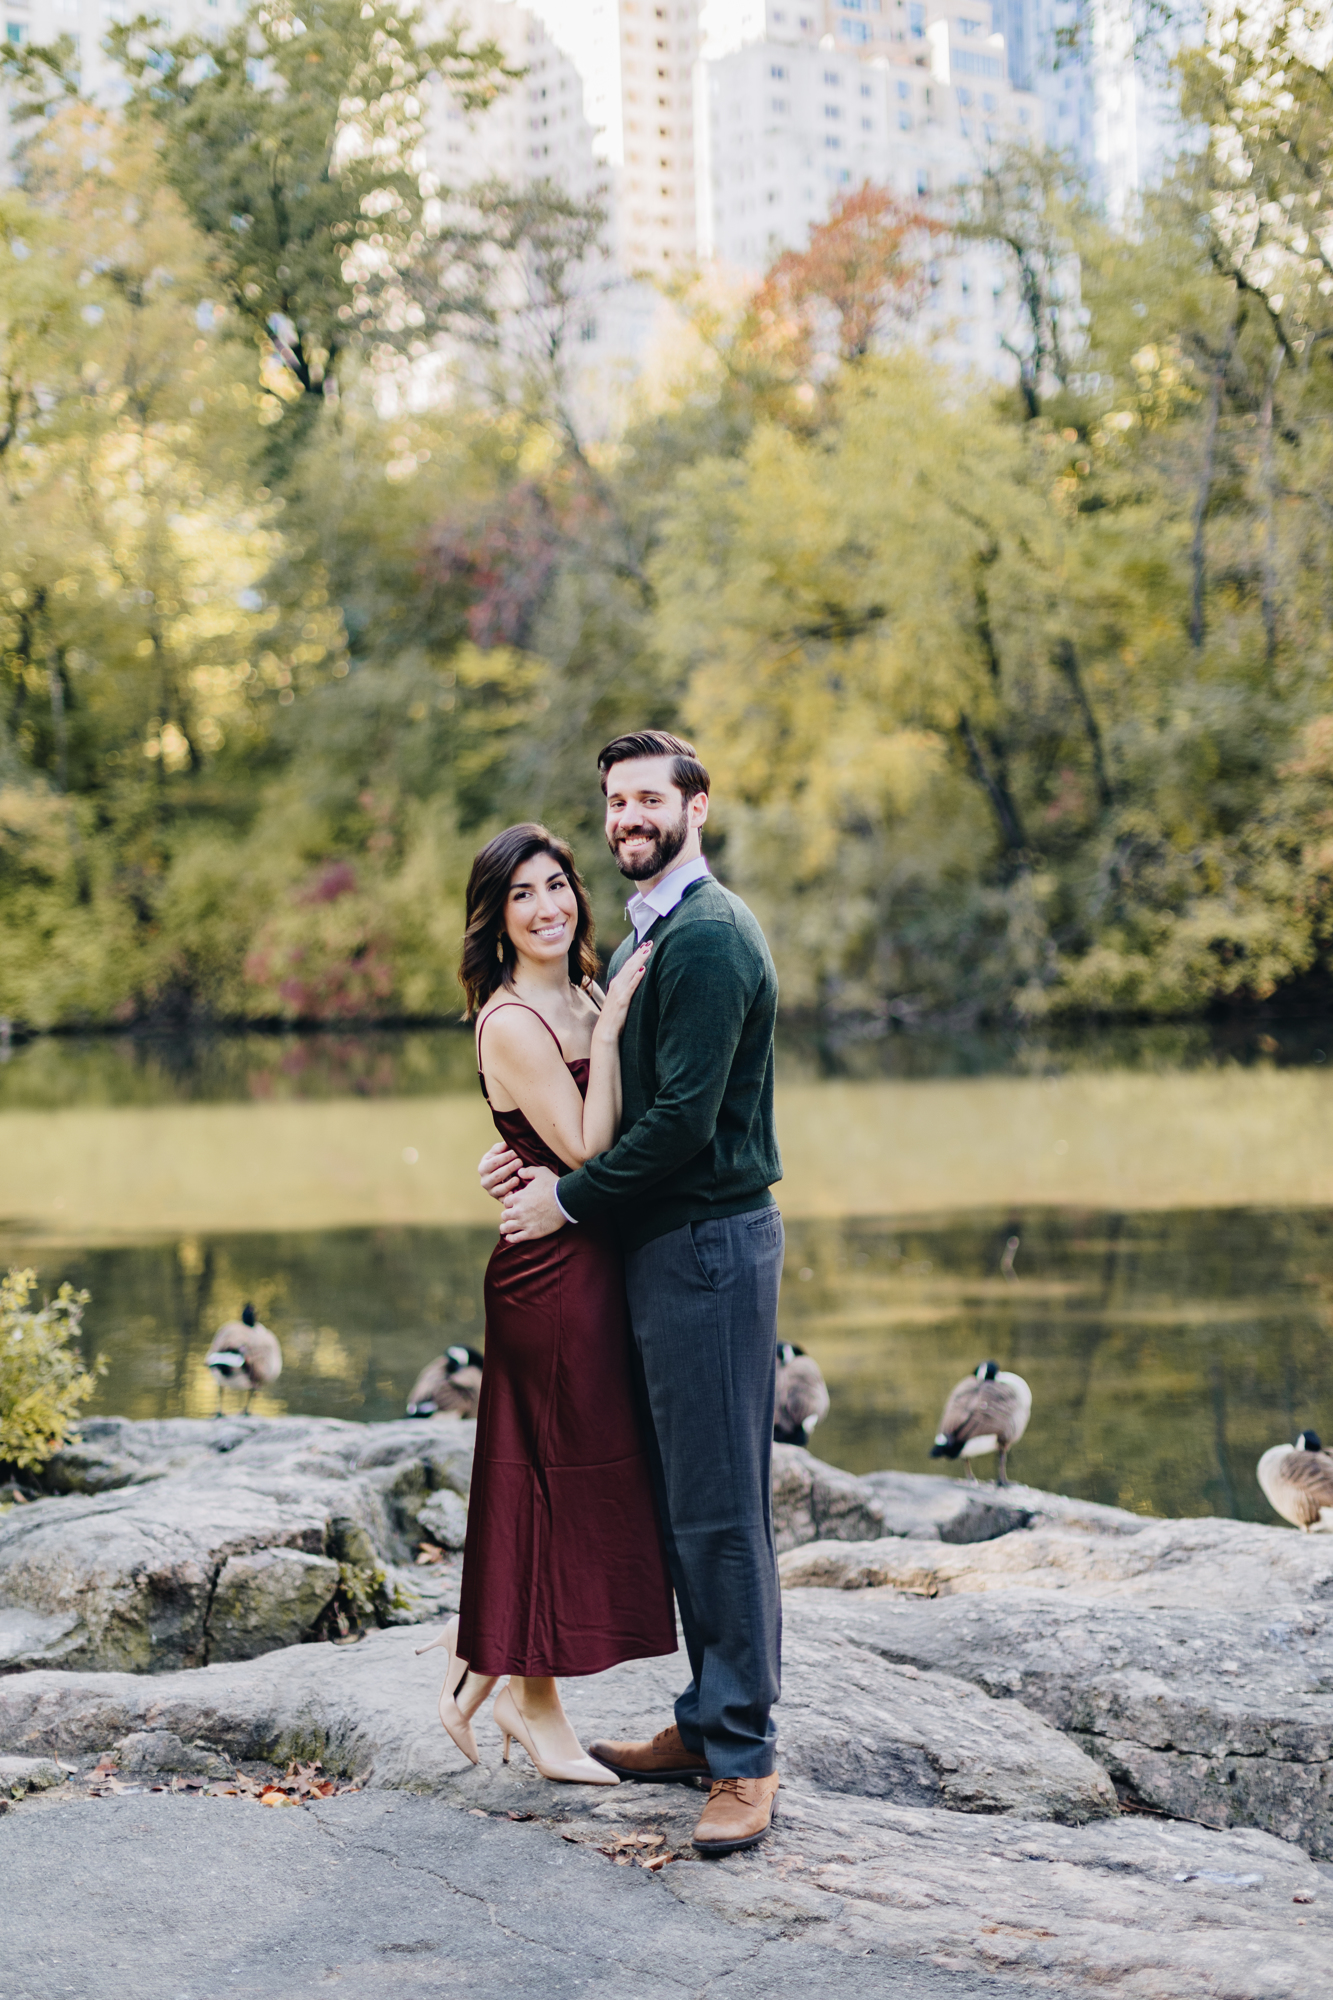 Dreamy Central Park Engagement Photos in Fall